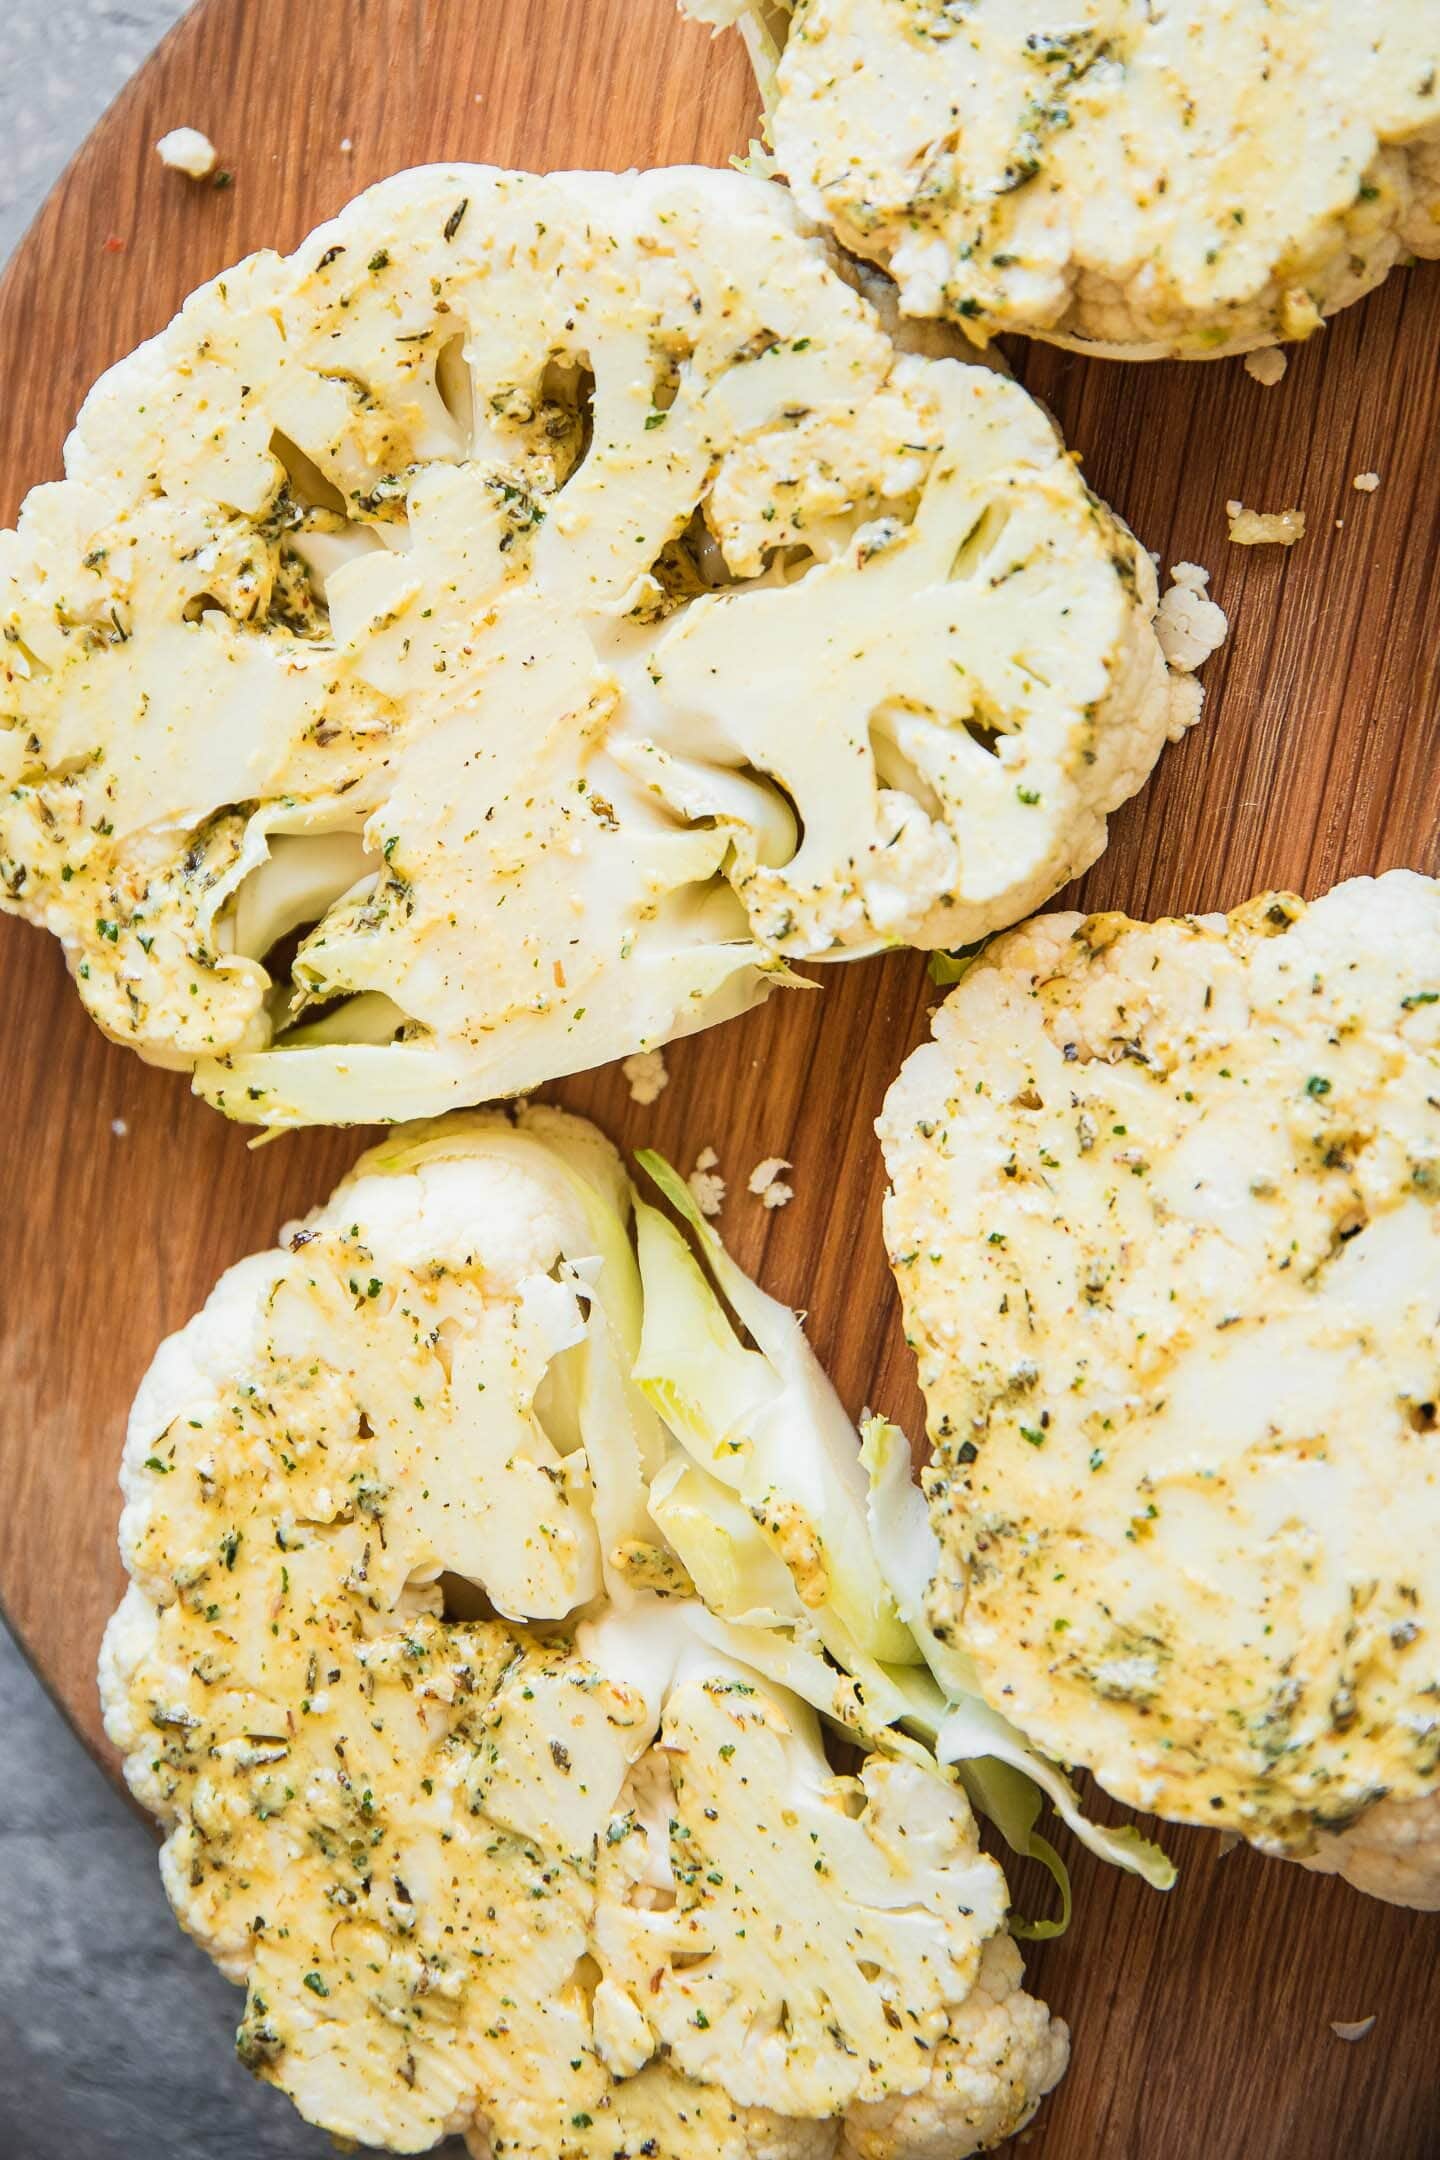 Cauliflower steaks with sauce on a wooden board